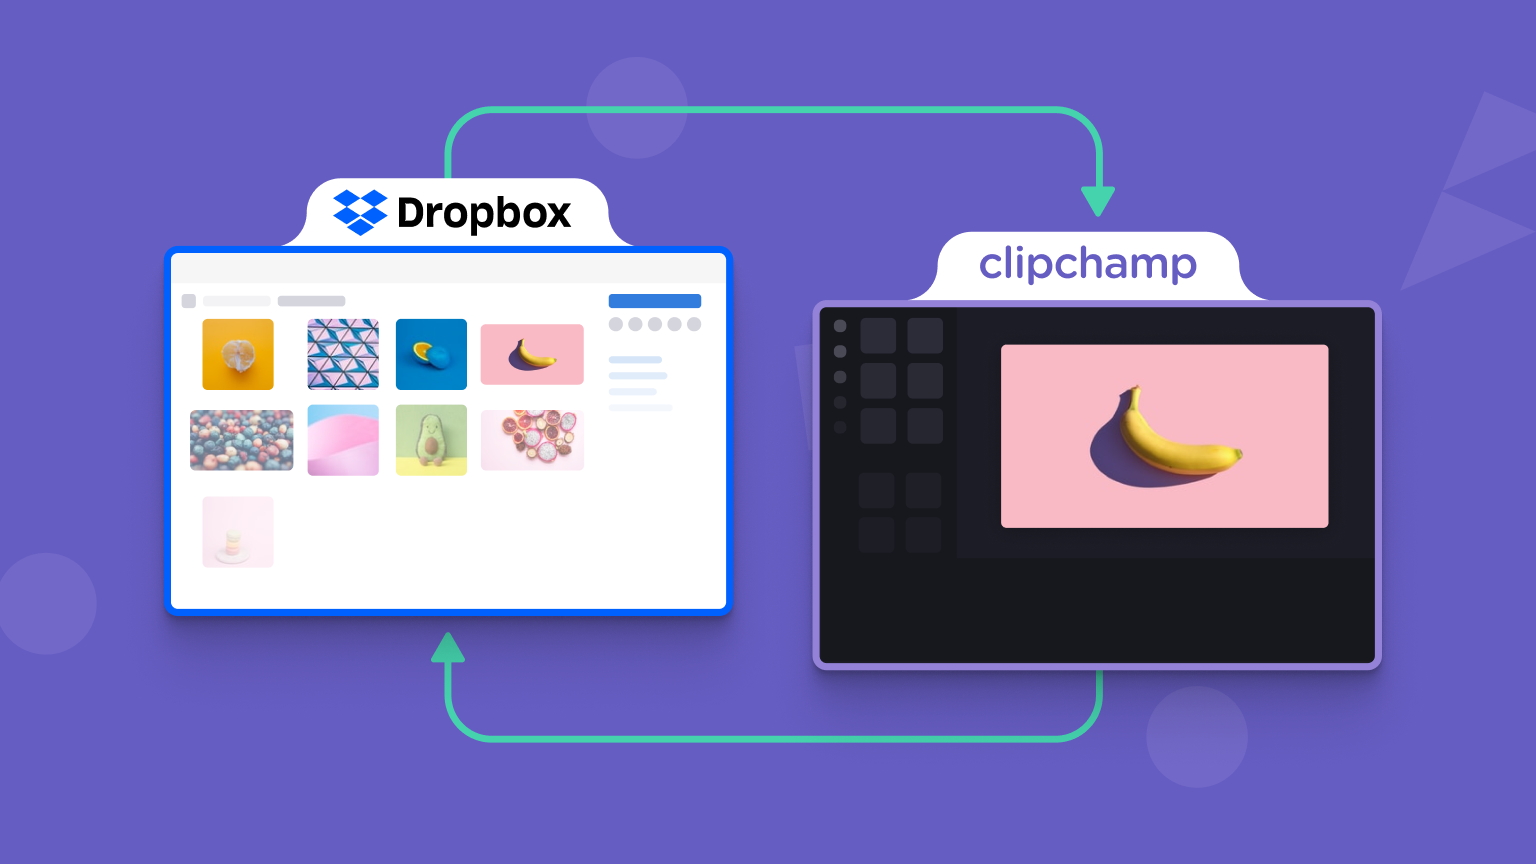 Feature image with Dropbox and Clipchamp depicted as folders with arrows pointing to each other